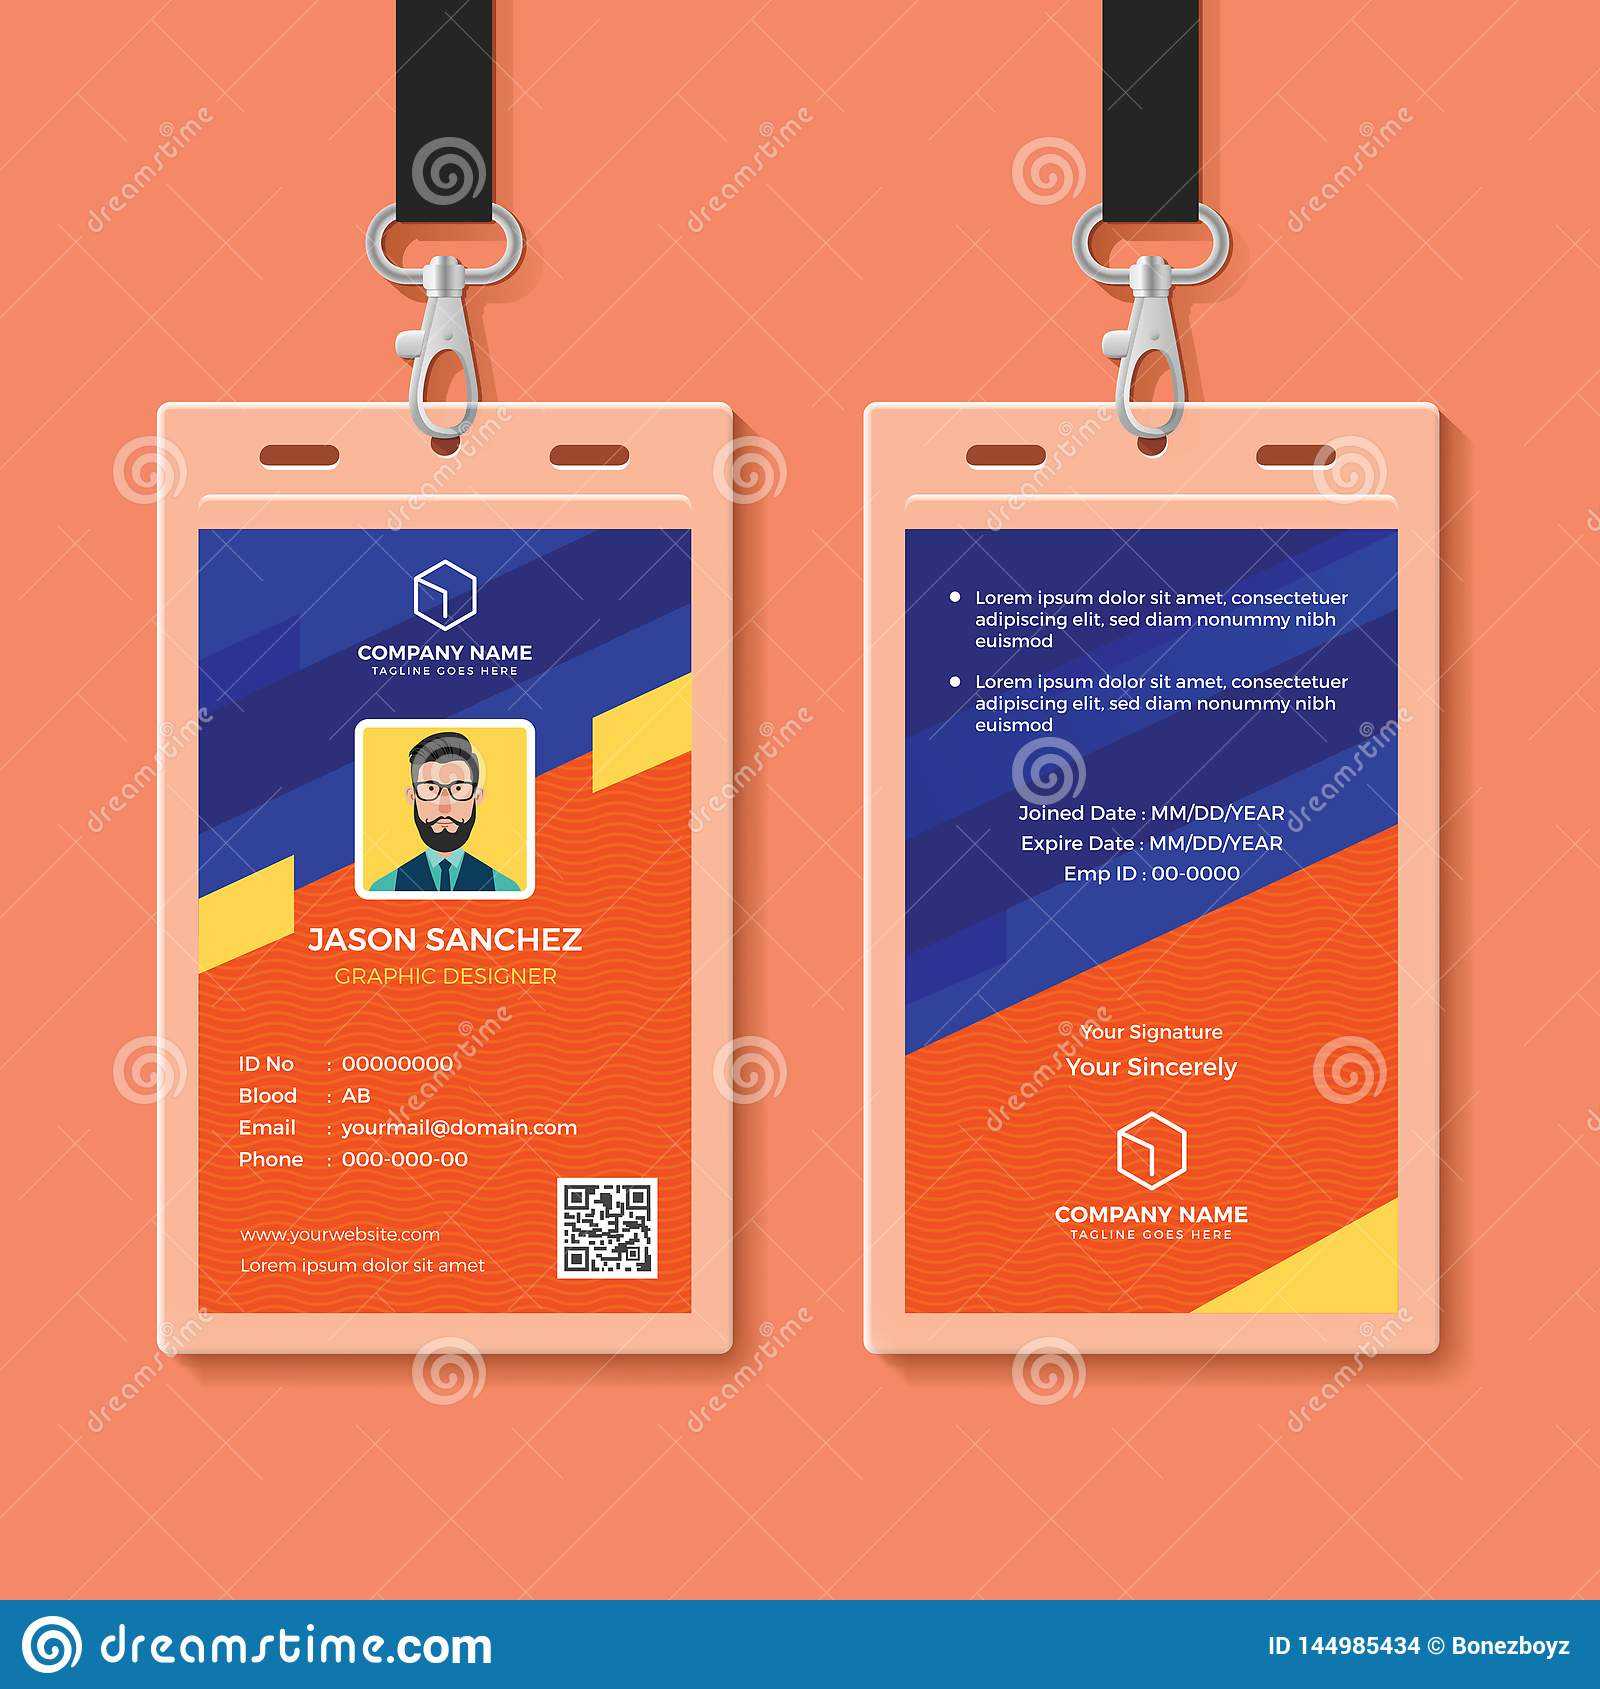 Modern Graphic Id Card Design Template Stock Vector Inside Spy Id Card Template